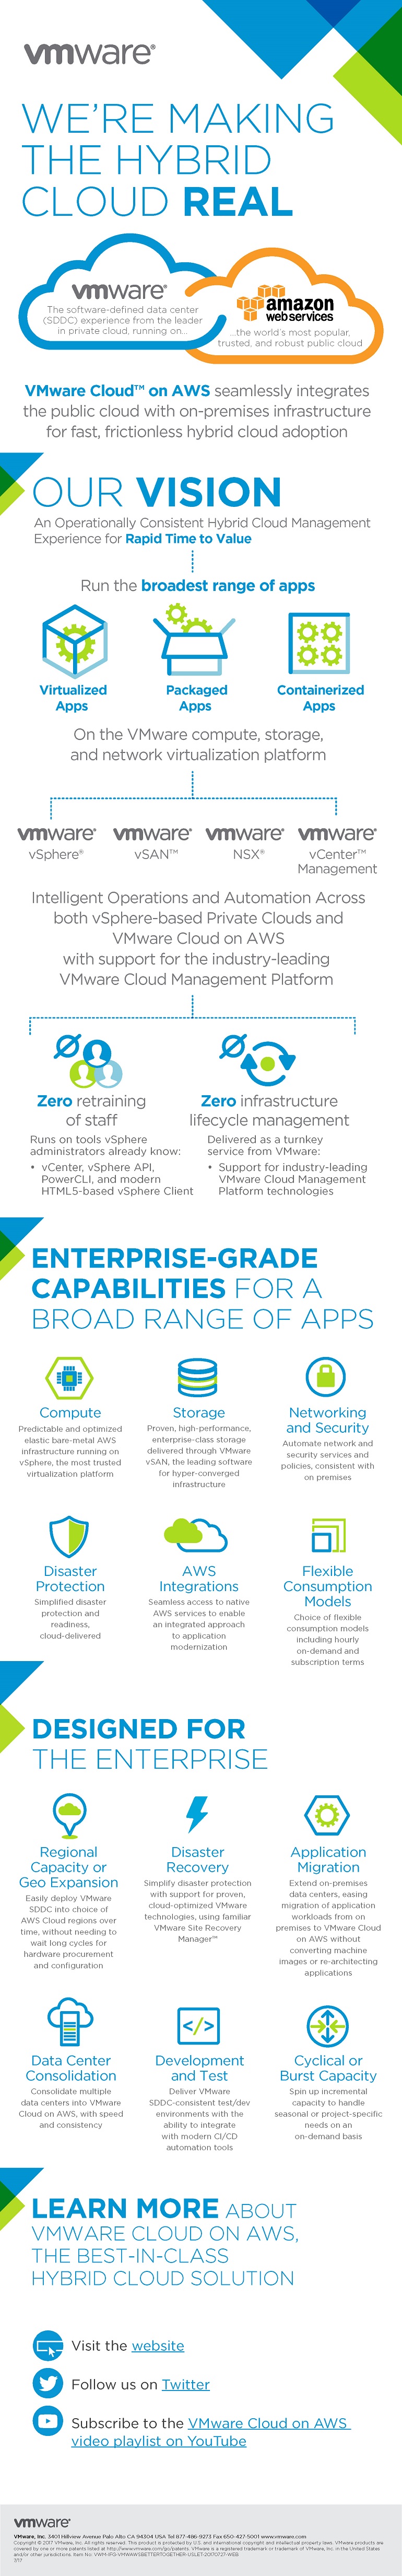 VMware Cloud on AWS Infographic. Translated below.